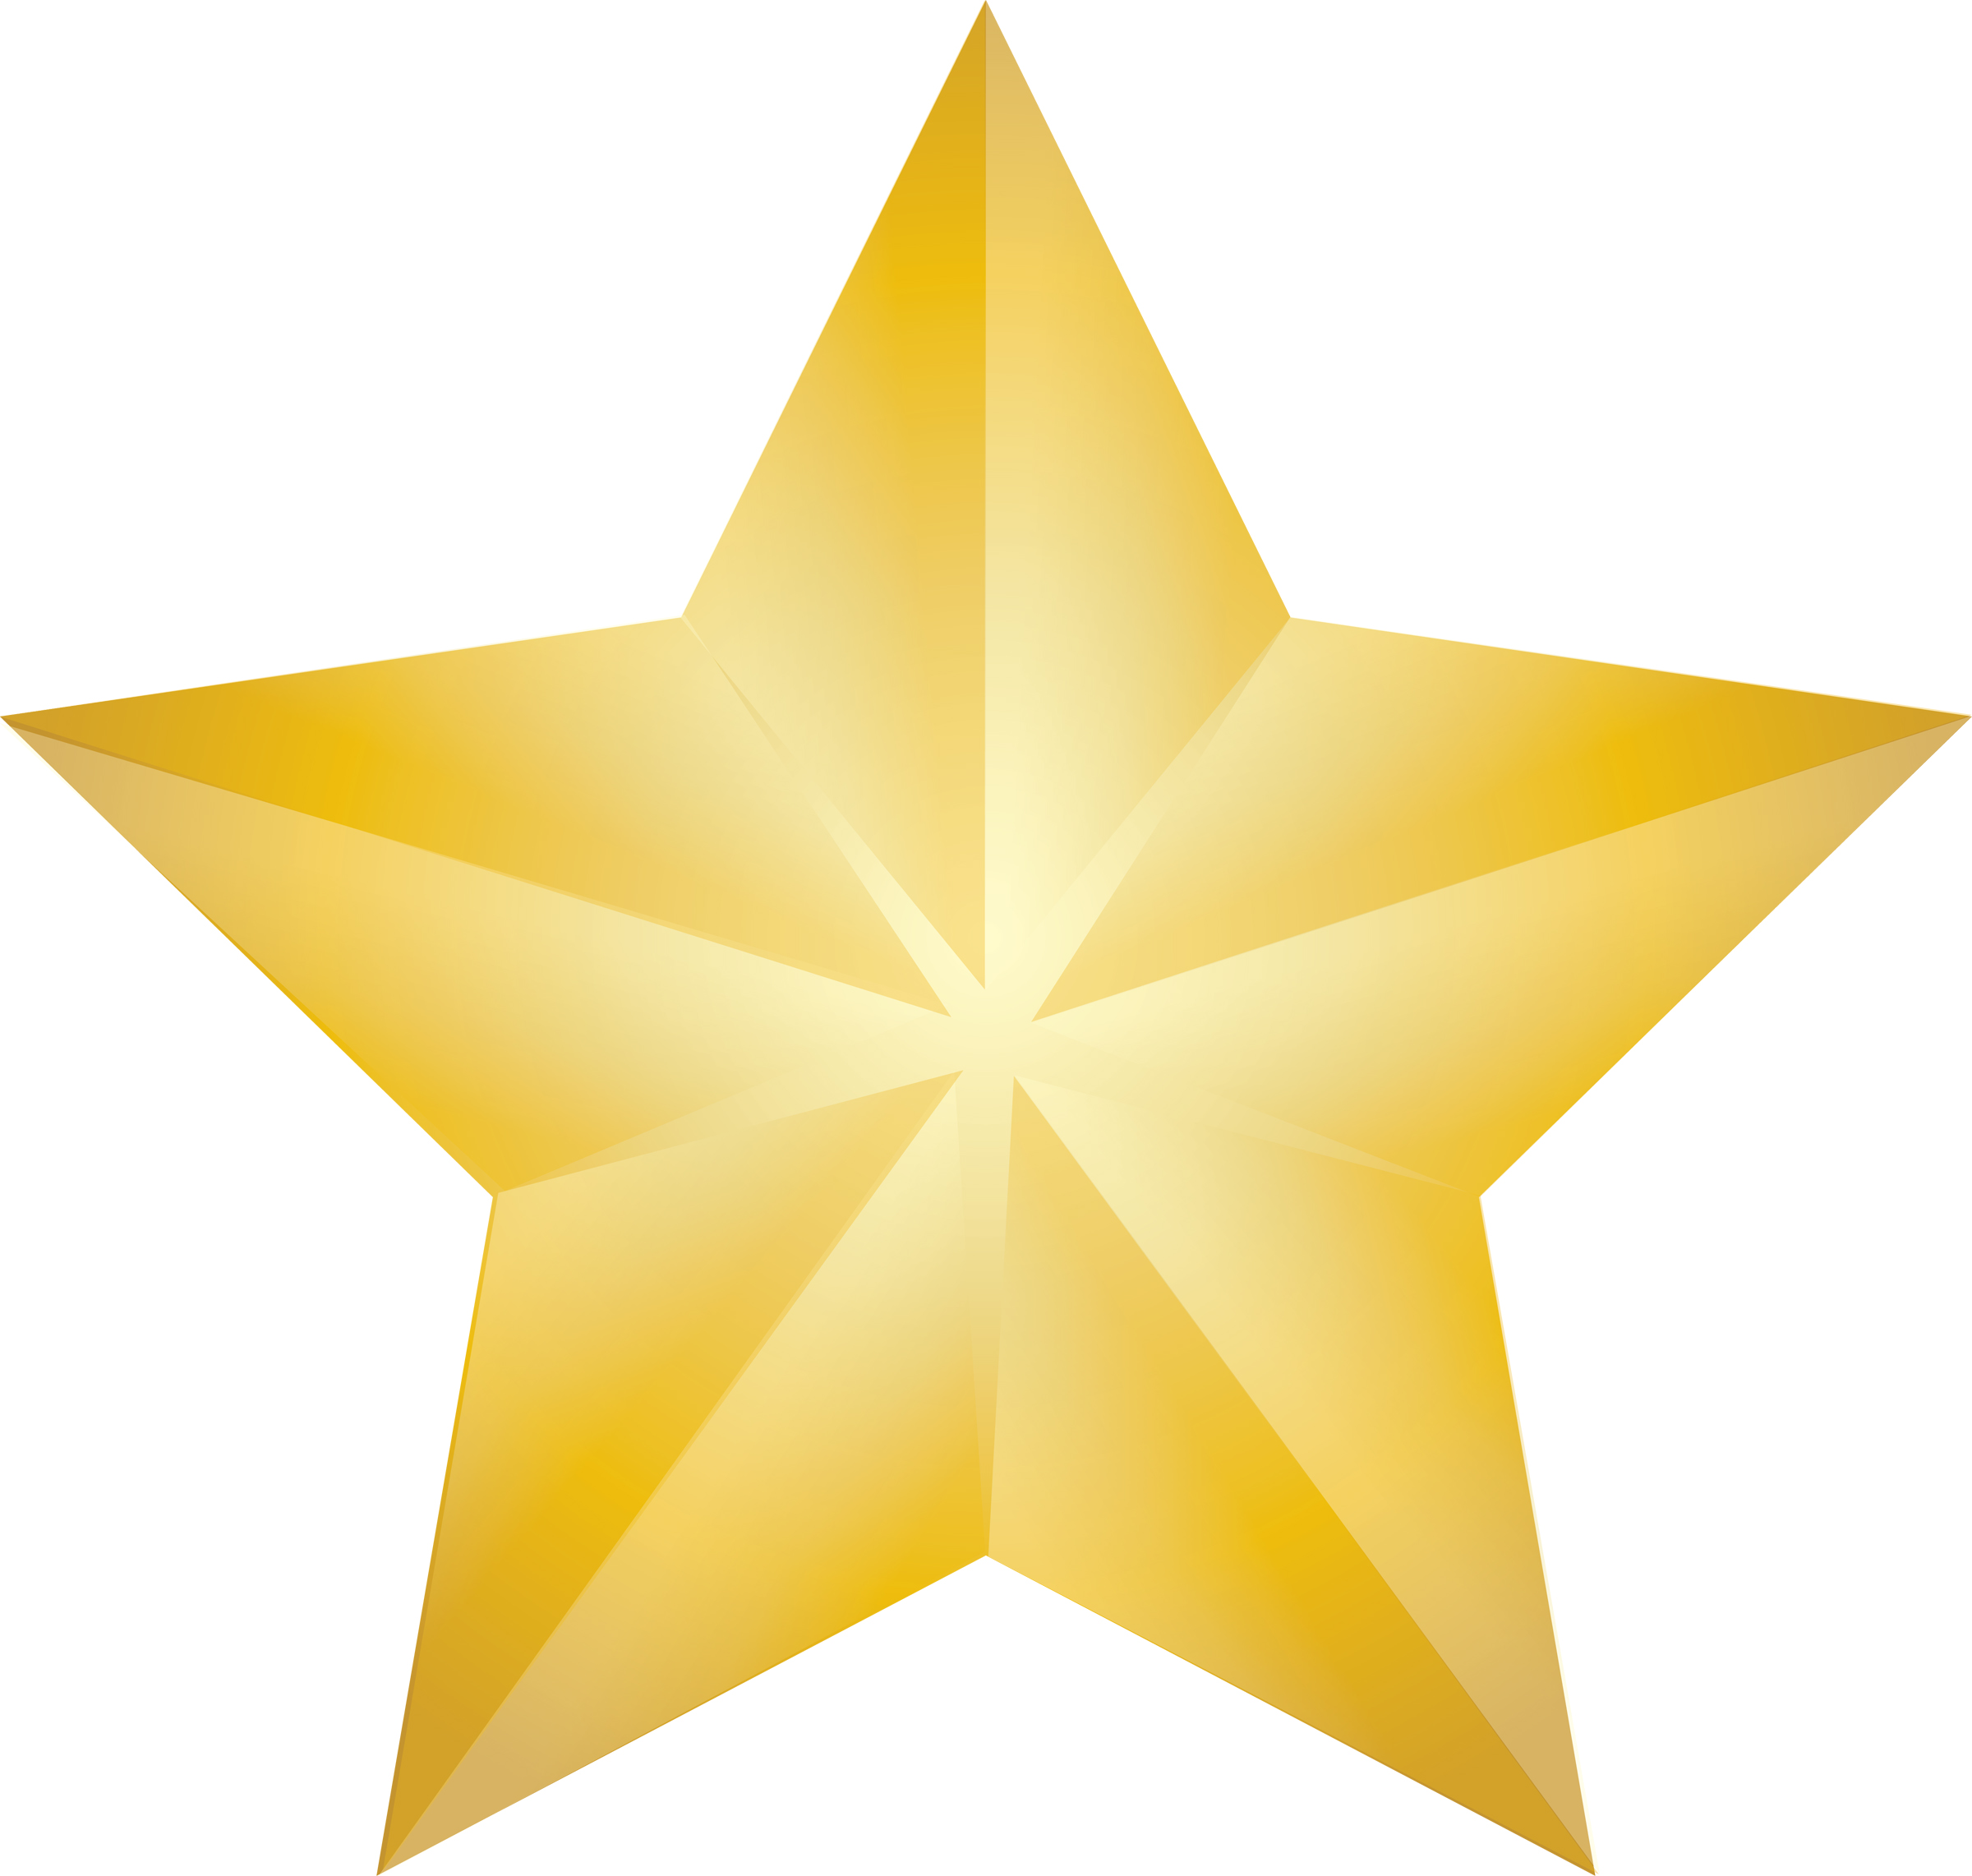 The 2011 Gold Star Awards For Outstanding Teaching Co Sponsored By